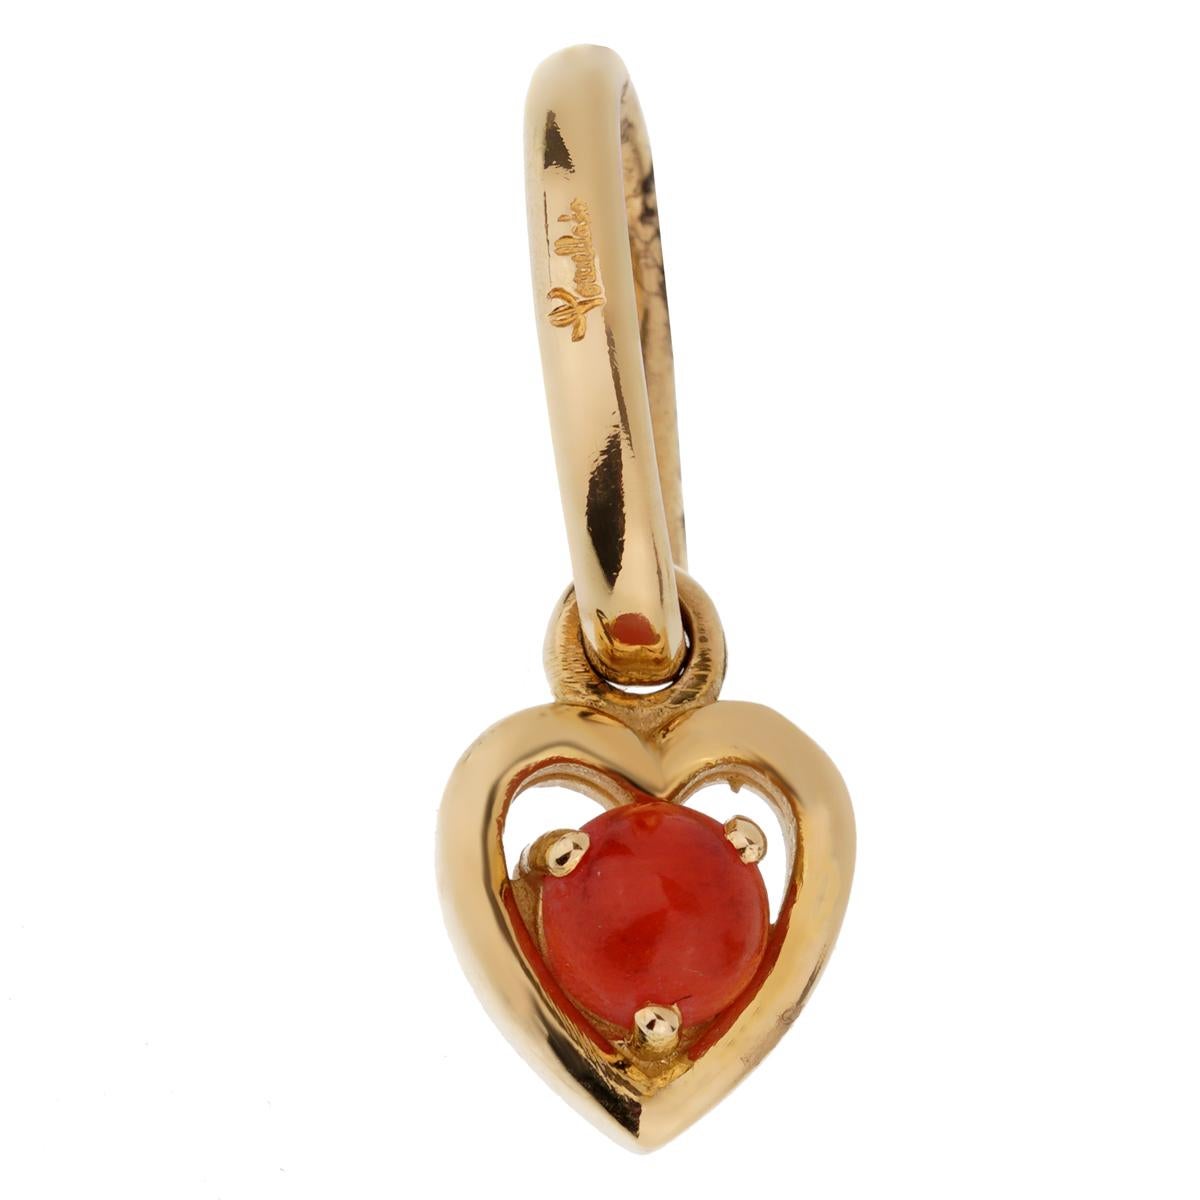 A chic brand new Pomellato charm pendant featuring a .28ct Red Coral set in 18k yellow gold. 

Sku: 2222